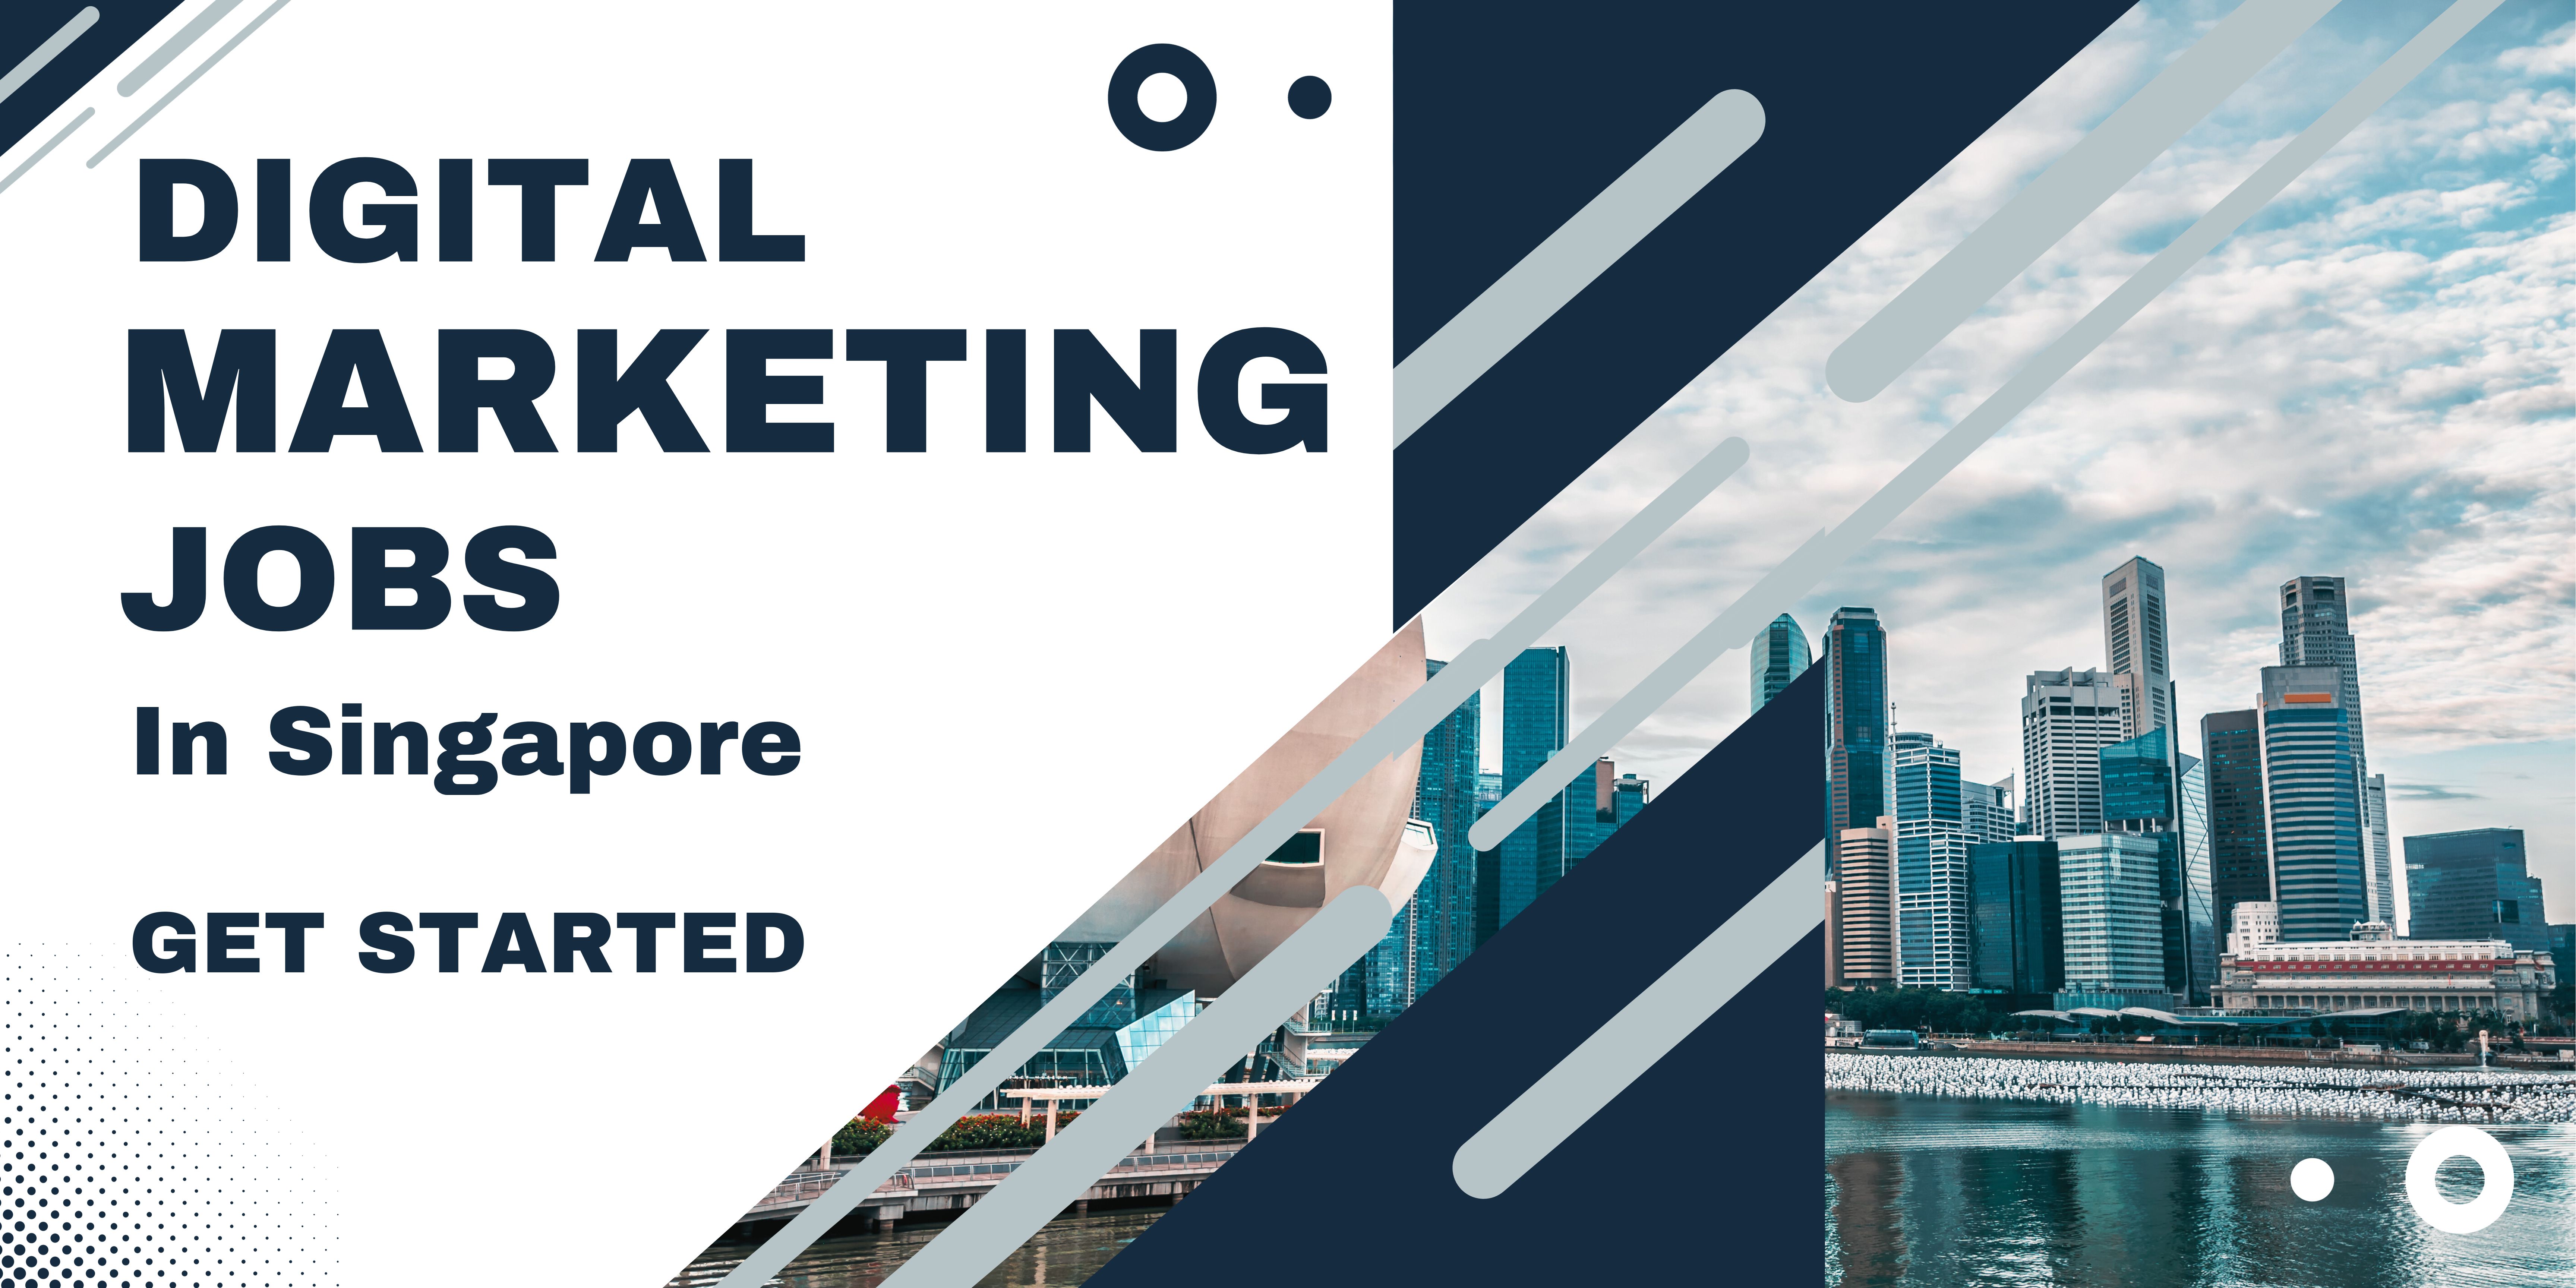 How to Get Digital Marketing Jobs in Singapore